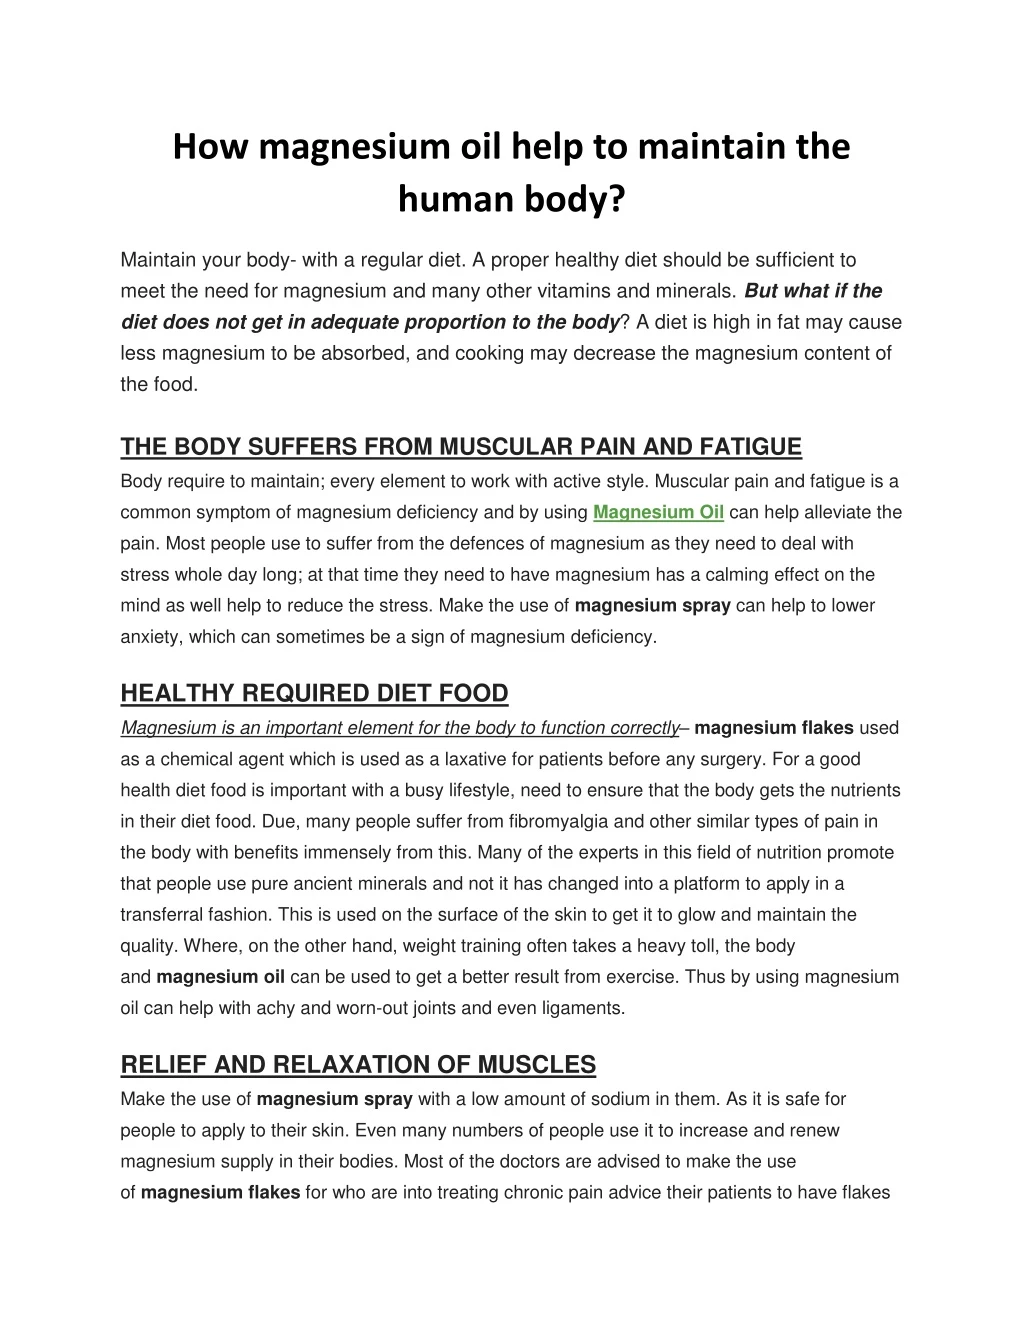 how magnesium oil help to maintain the human body